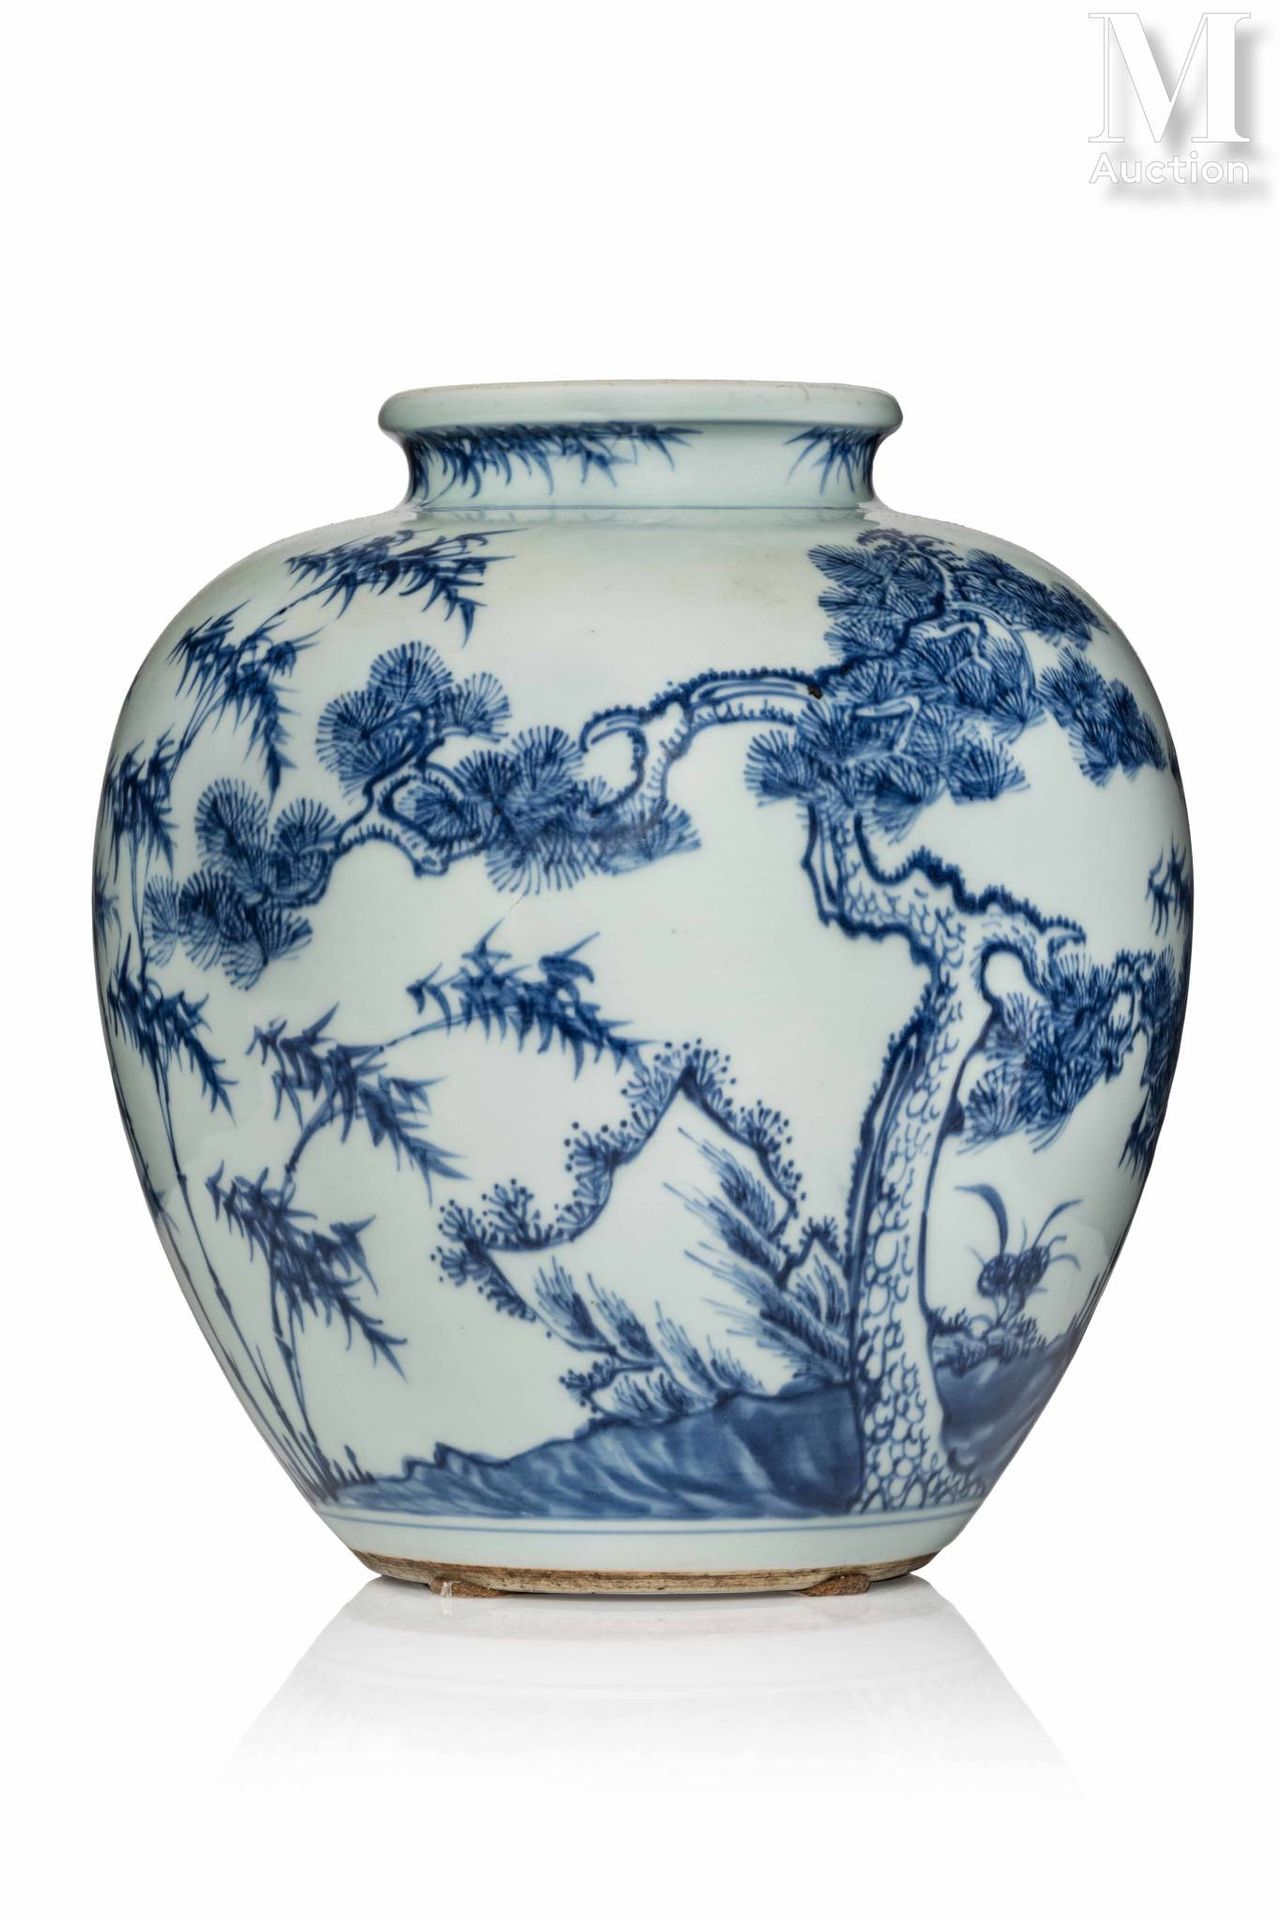 CHINE, XVIIIe-XIXe siècle Porcelain vase

ovoid form, decorated in blue and whit&hellip;